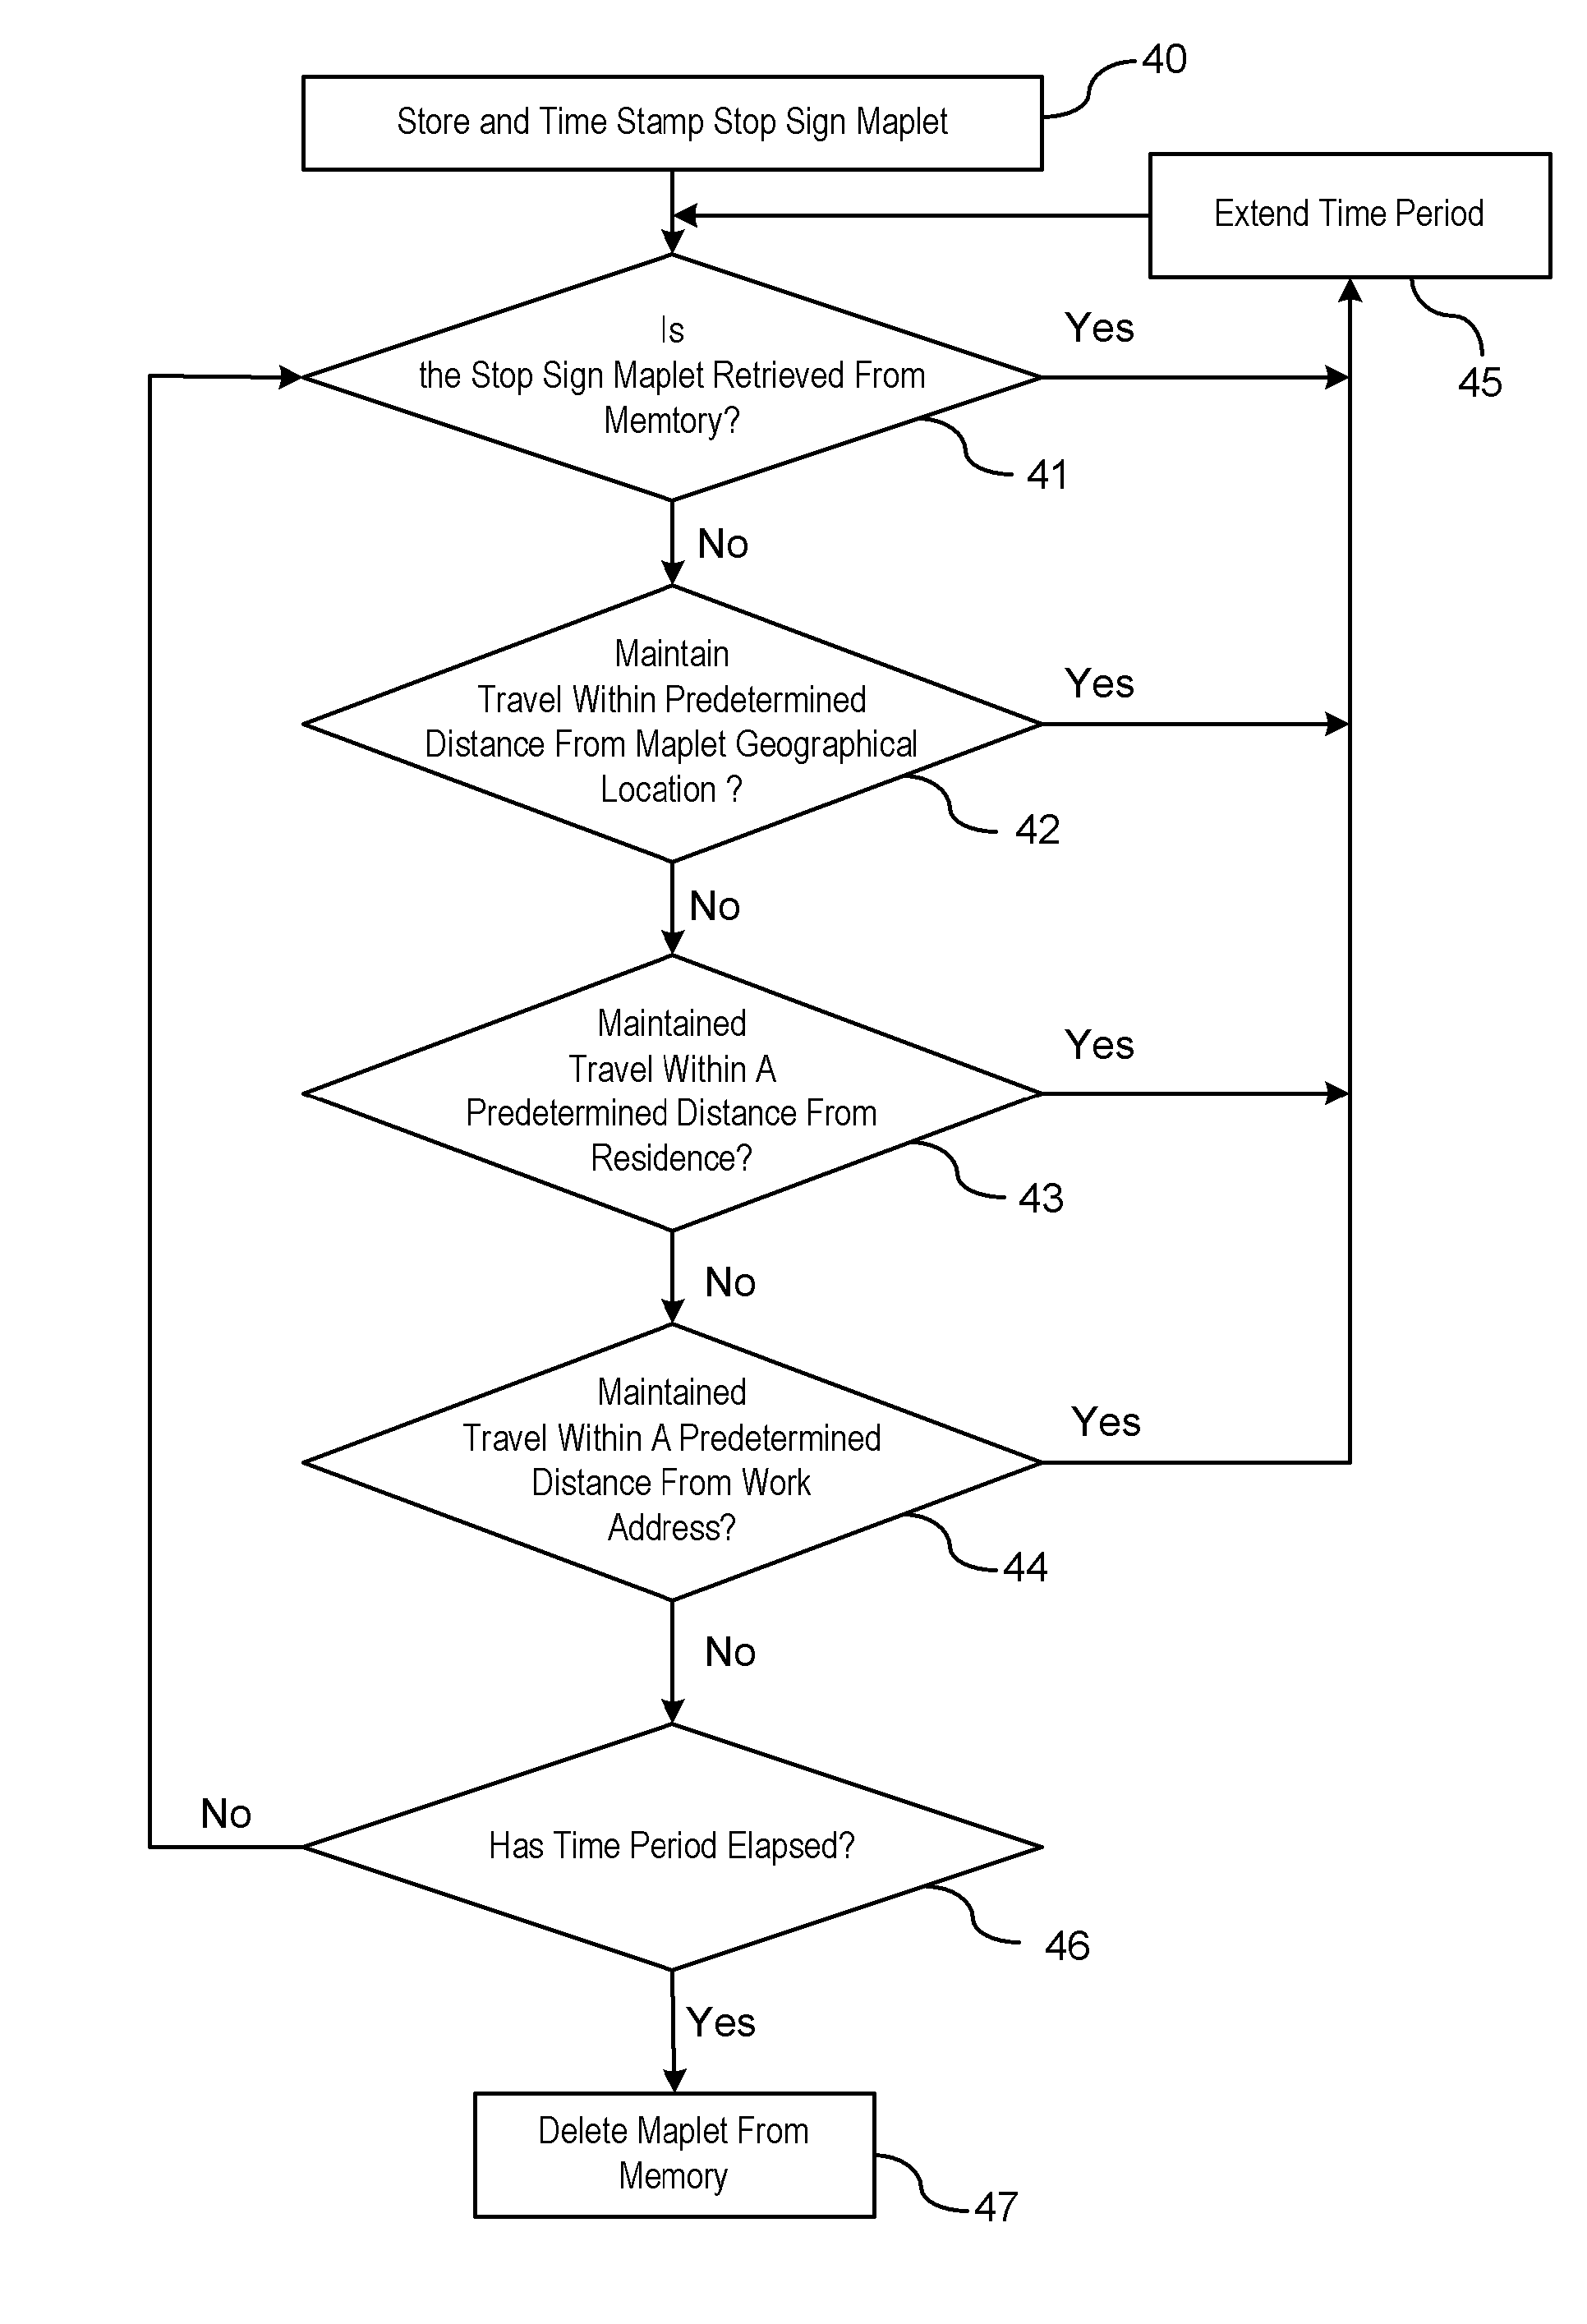 System and method for managing geographical maplet downloads for a vehicle to support stop sign violation assist and similar applications